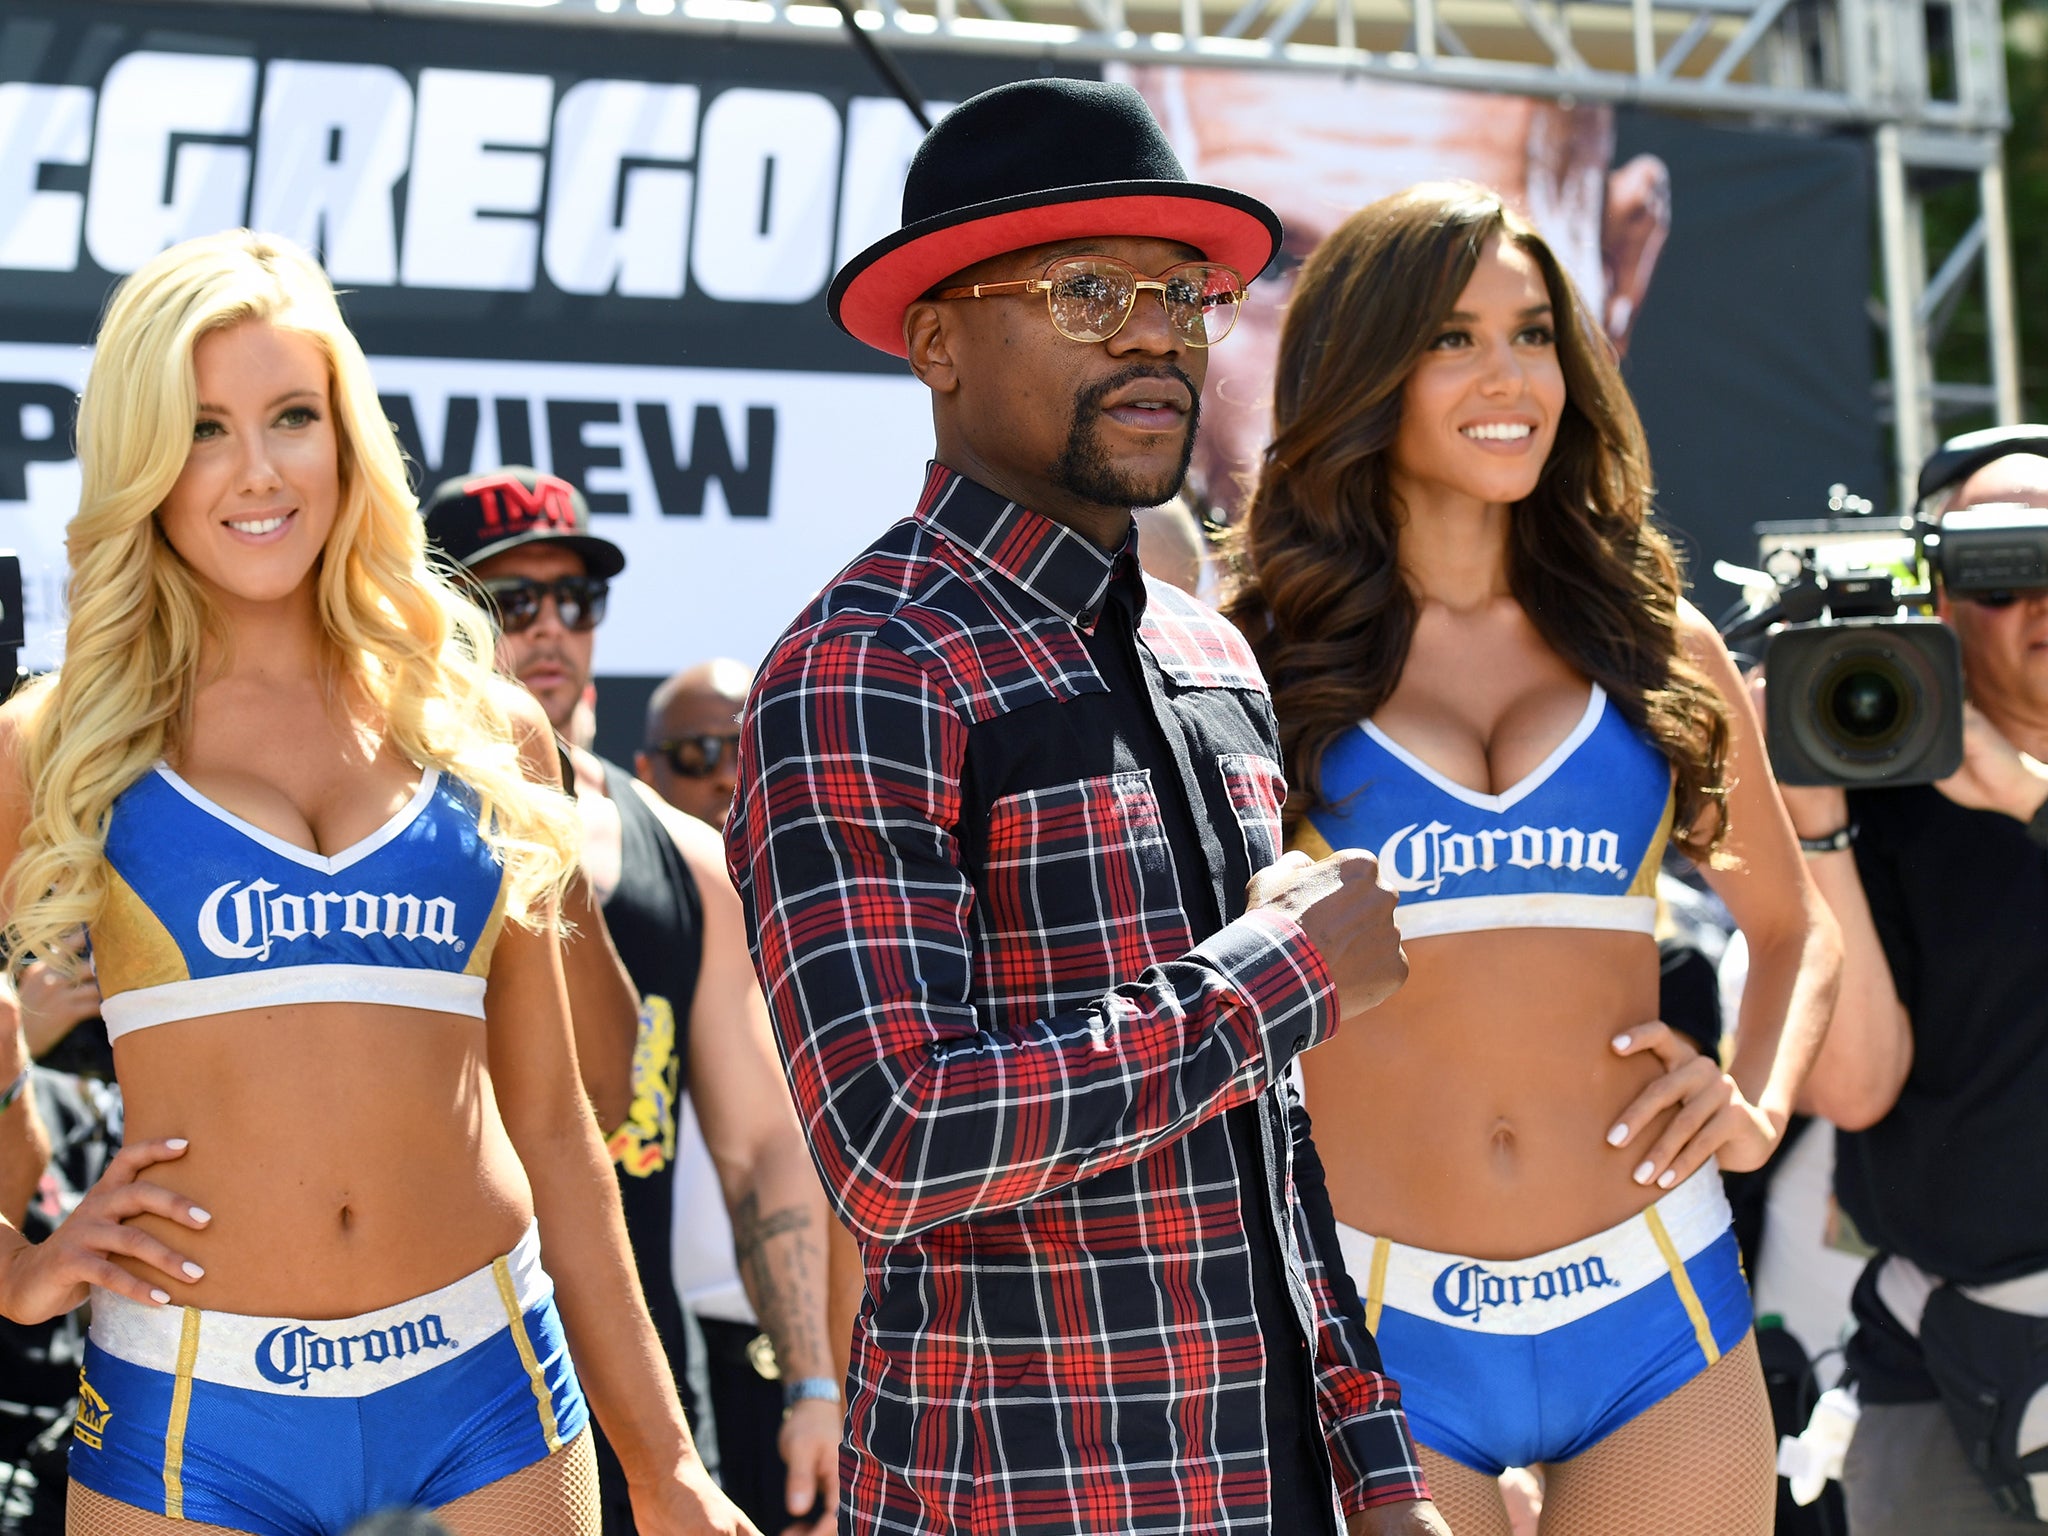 Floyd Mayweather needs this fight to pay off a huge tax bill